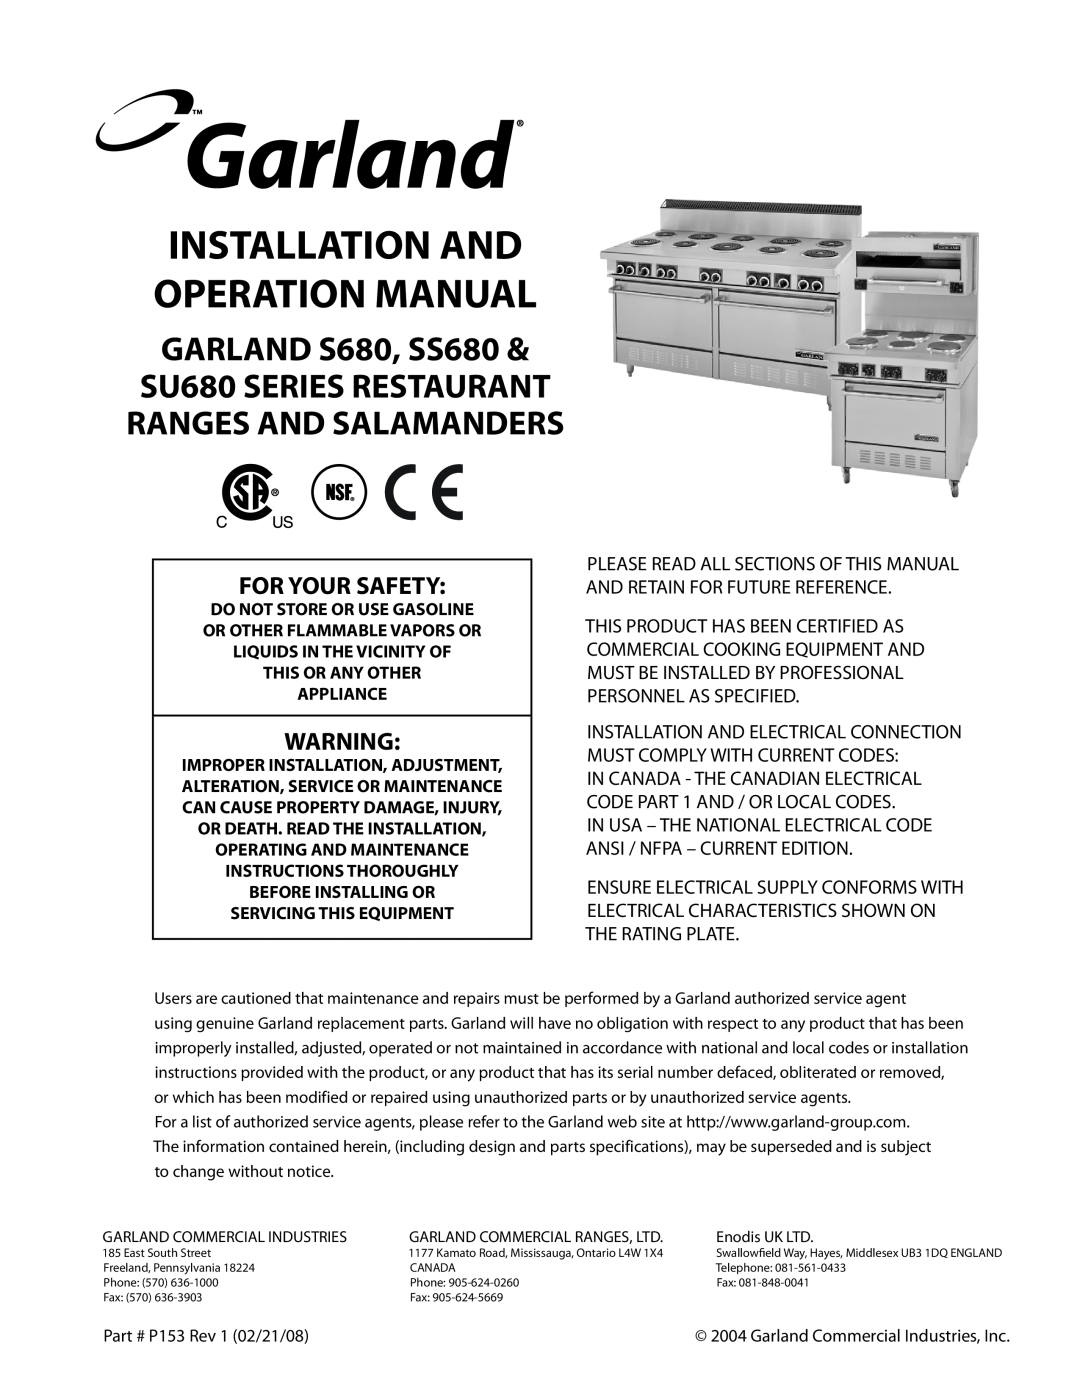 Garland operation manual GARLAND S680, SS680, SU680 SERIES RESTAURANT RANGES AND SALAMANDERS, For Your Safety 